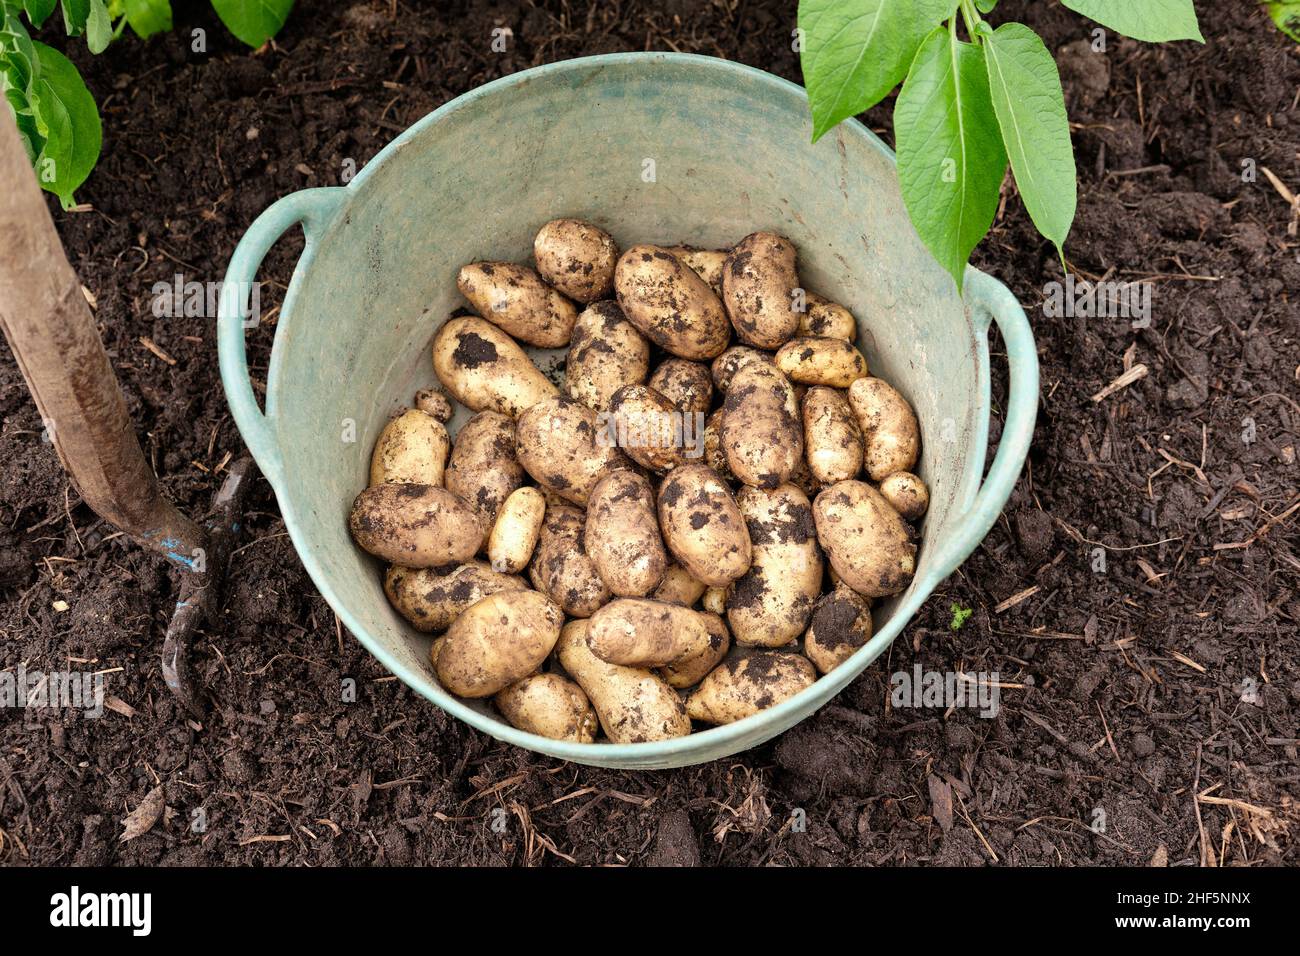 A green garden trug filled with freshly lifted Charlotte New Potatoes from a rich organic matter filled soil in a vegetable garden raised bed. Stock Photo